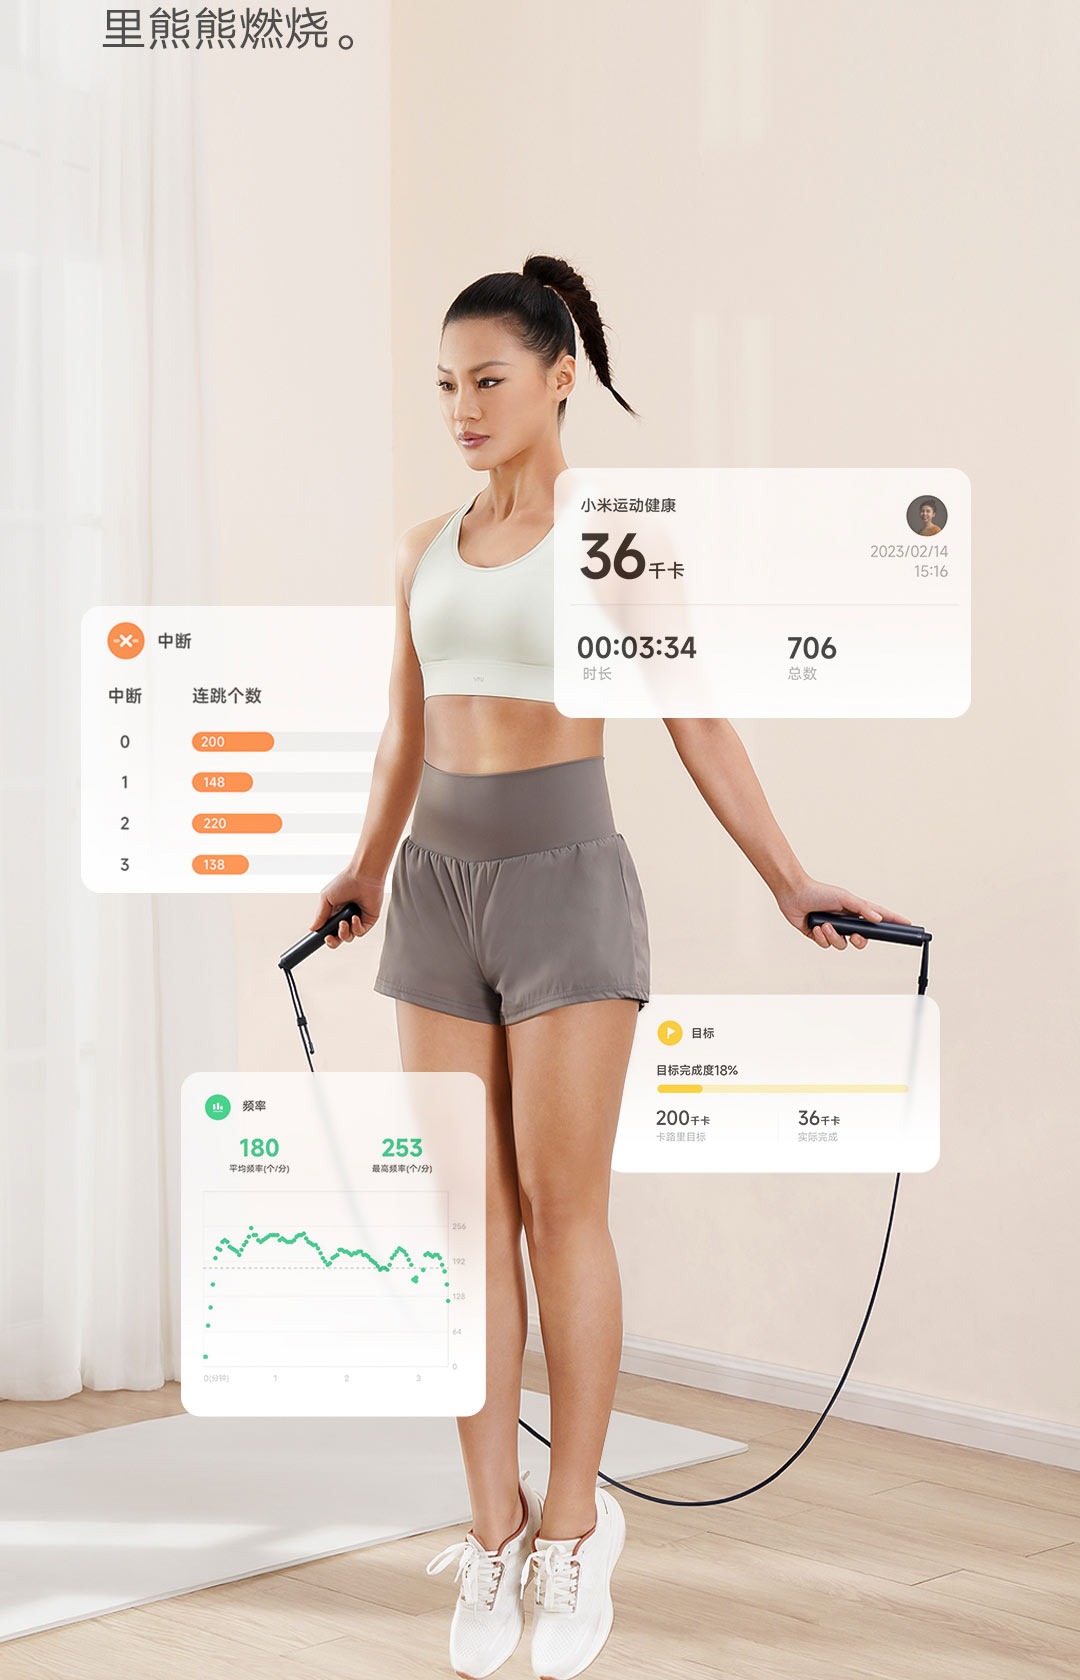 Xiaomi Mijia Smart Skipping Jump Rope Digital Counter With Apps Control